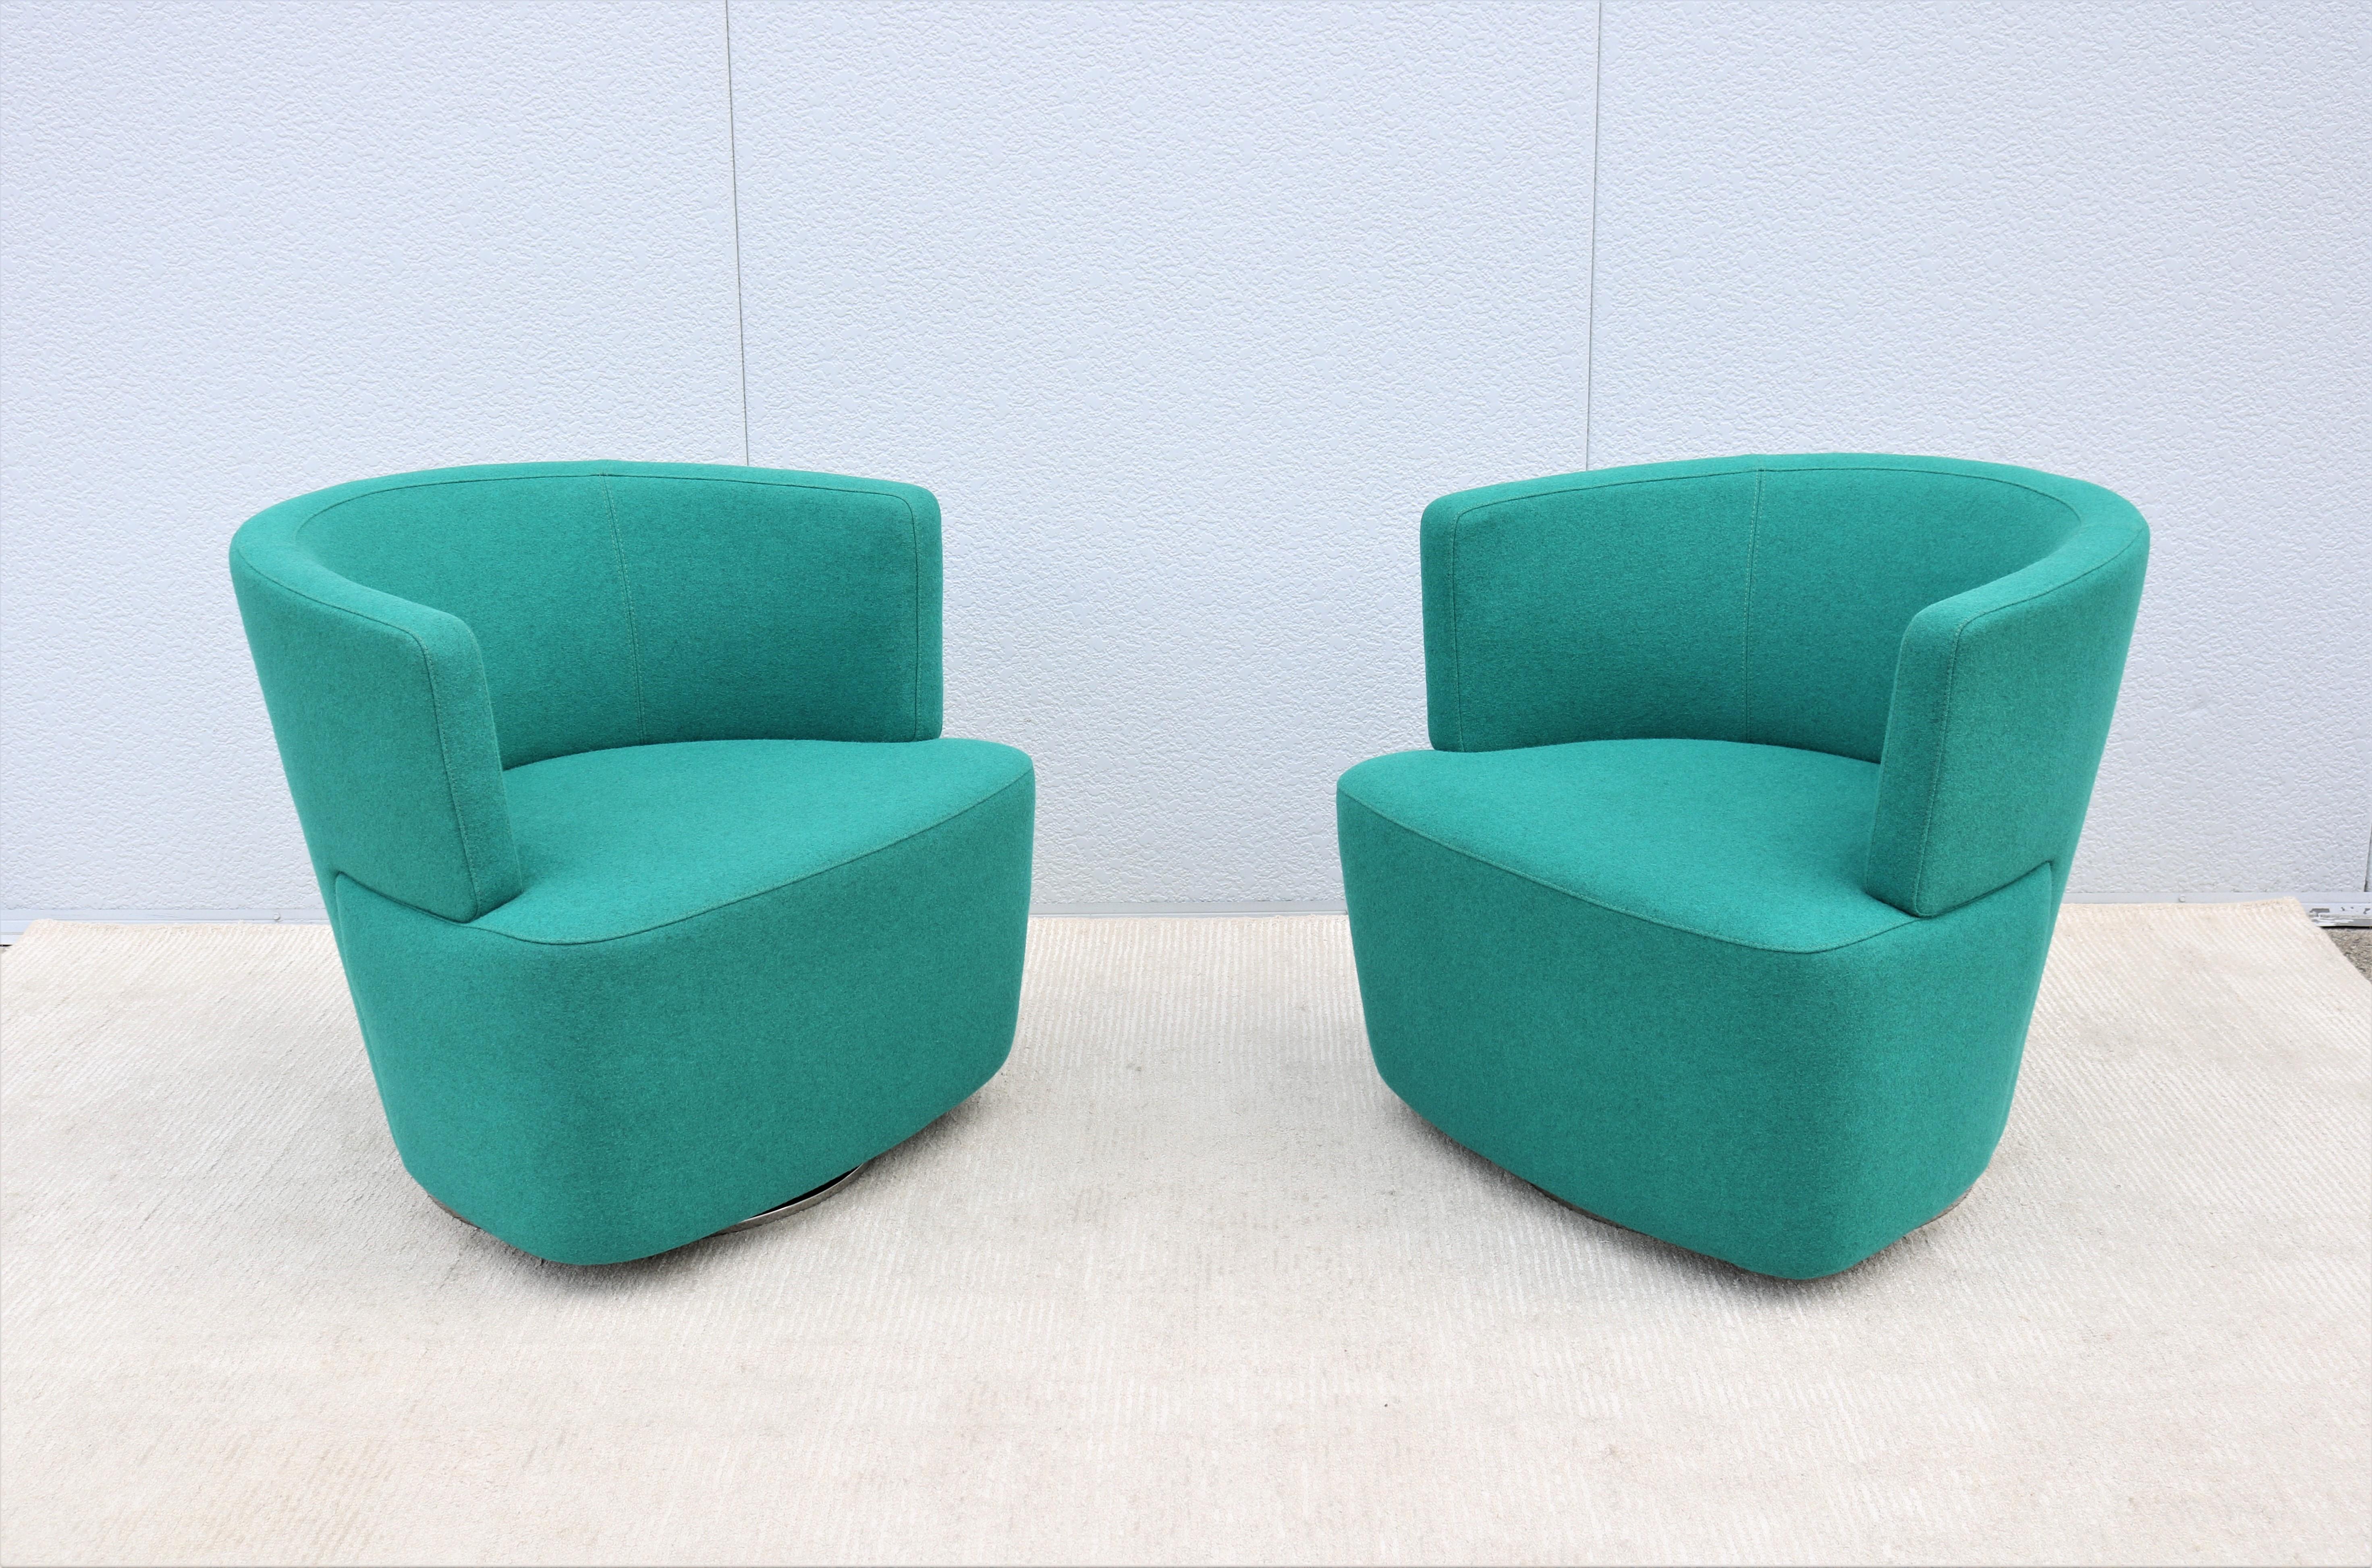 Fabulous pair of Joel blue swivel lounge chairs by Walter Knoll.
The modern beauty and smart design of the Joel lounge chair is a new take on the classic club chair.
Refined and modern masterpiece that's comfortable and well designed, well-crafted